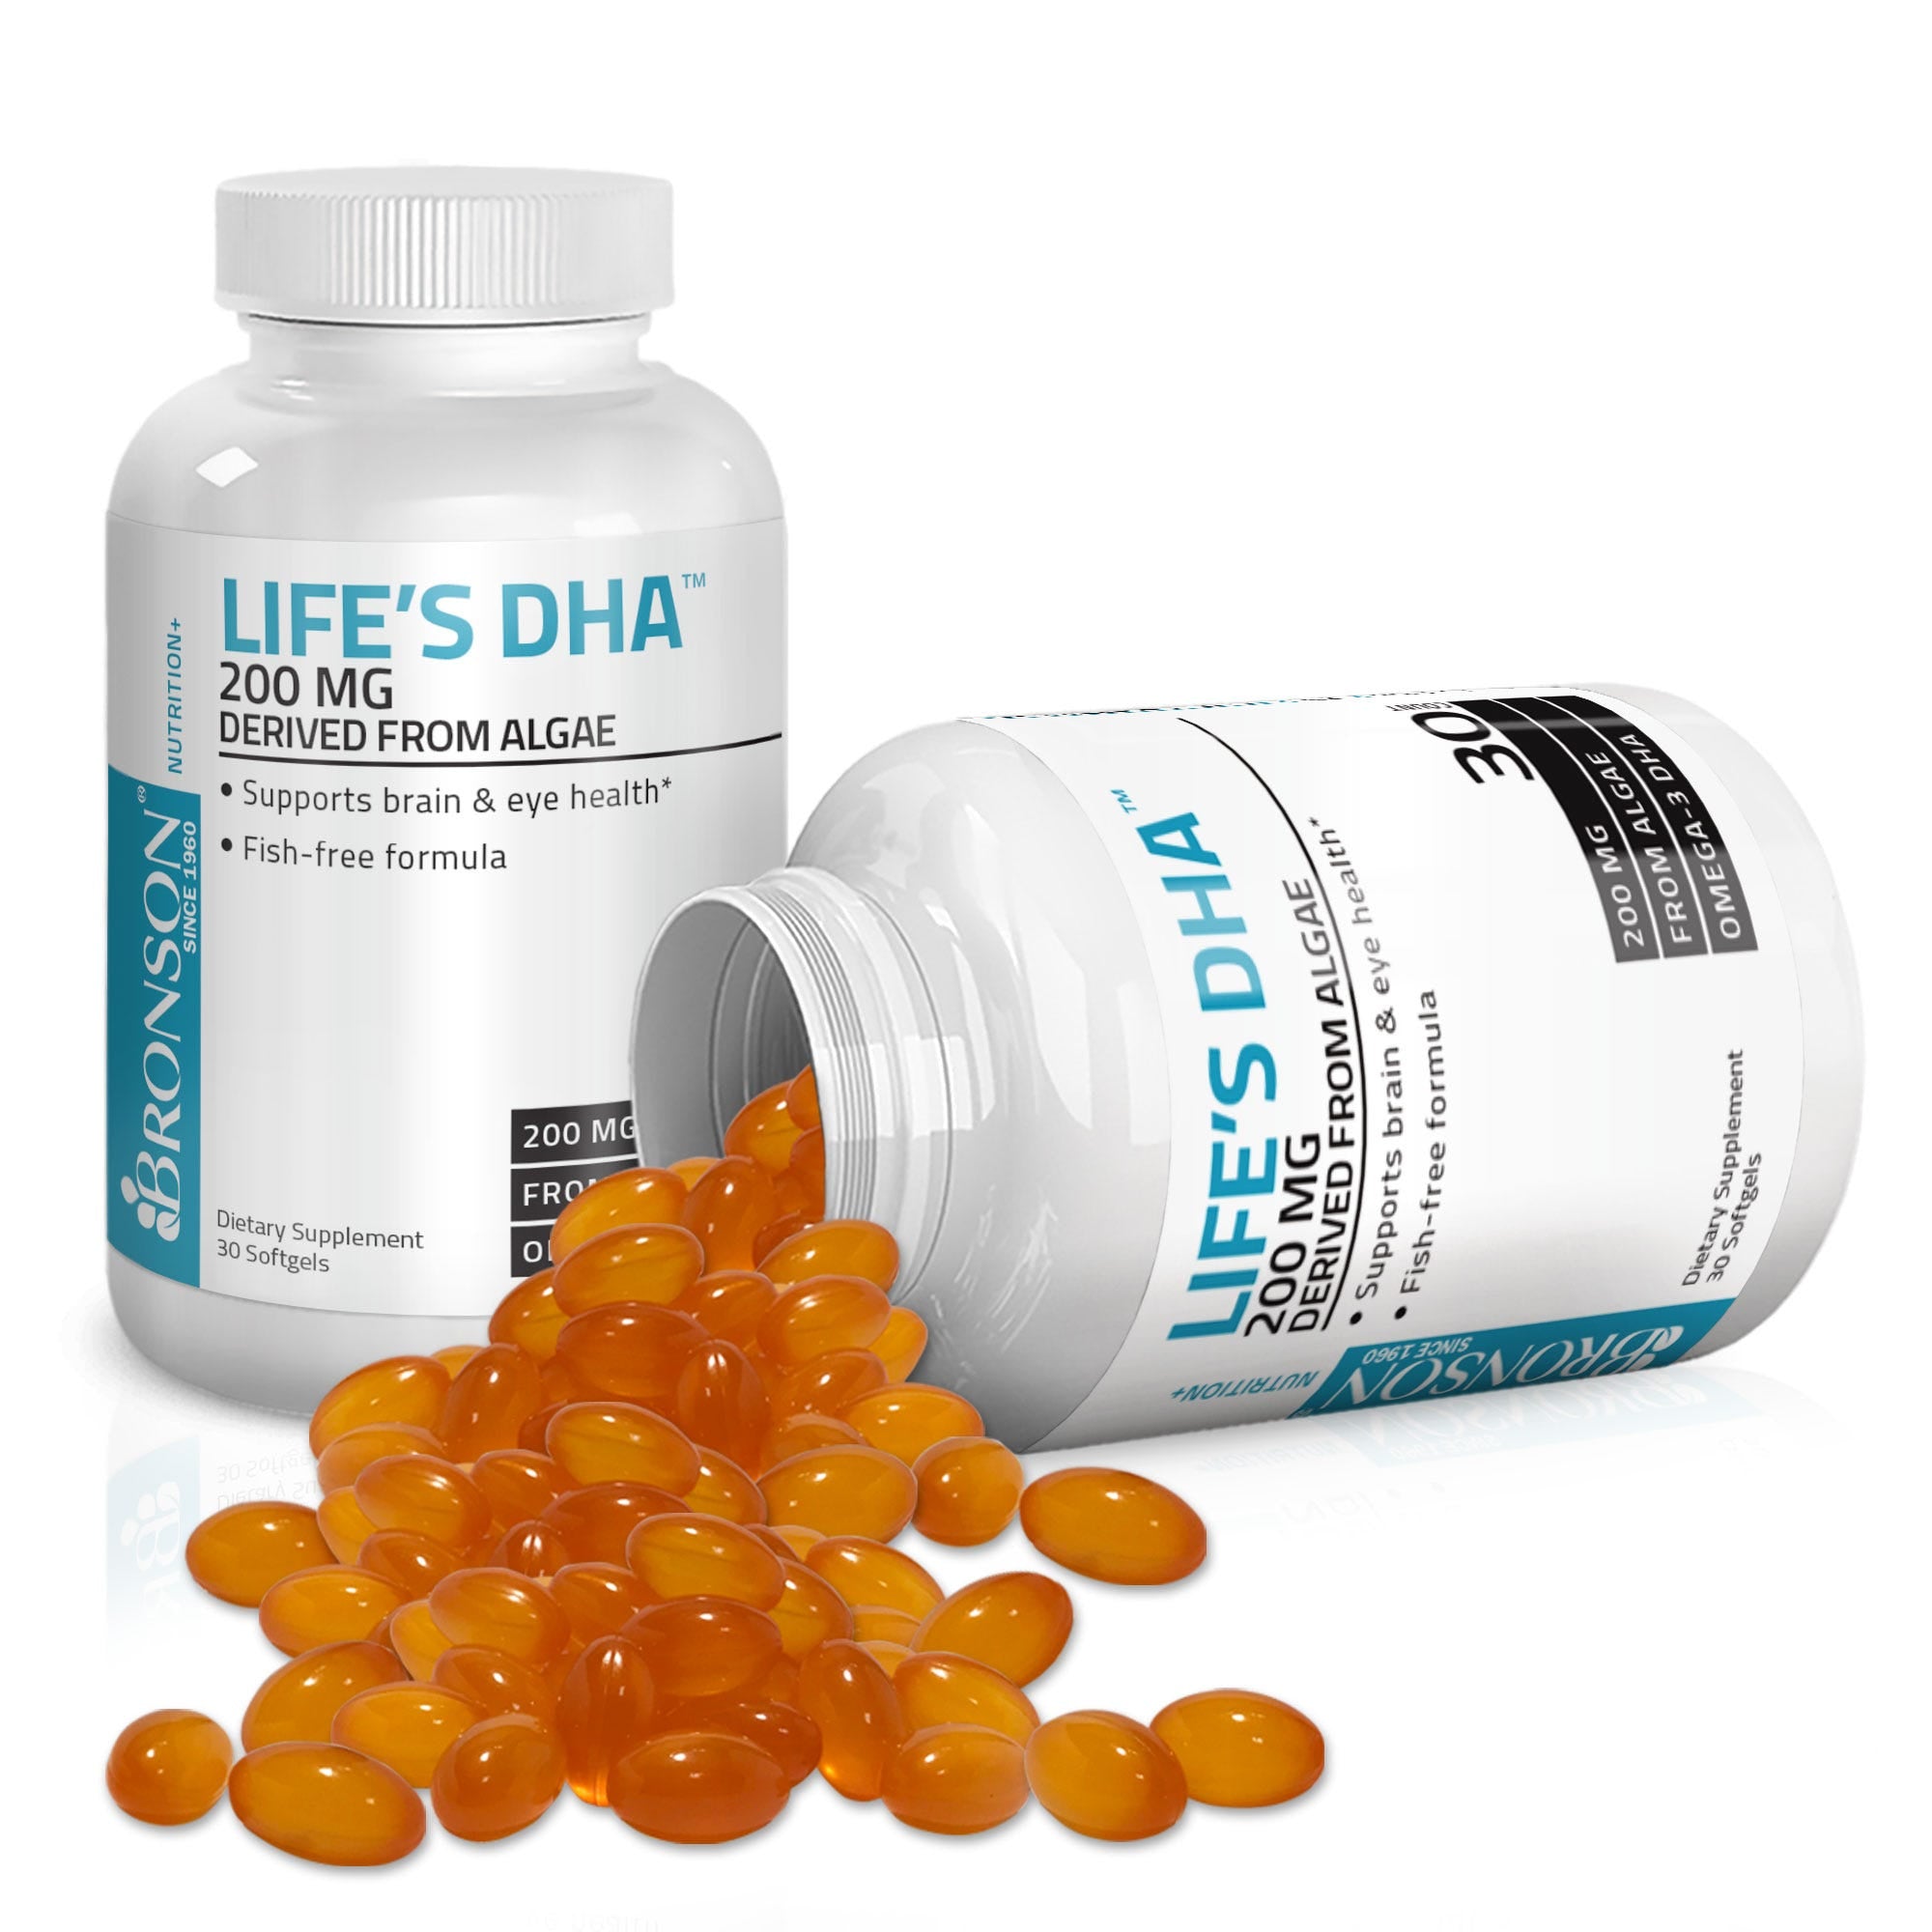 Life's DHA™ Vegetarian Derived from Algae - 200 mg - 30 Softgels view 3 of 6